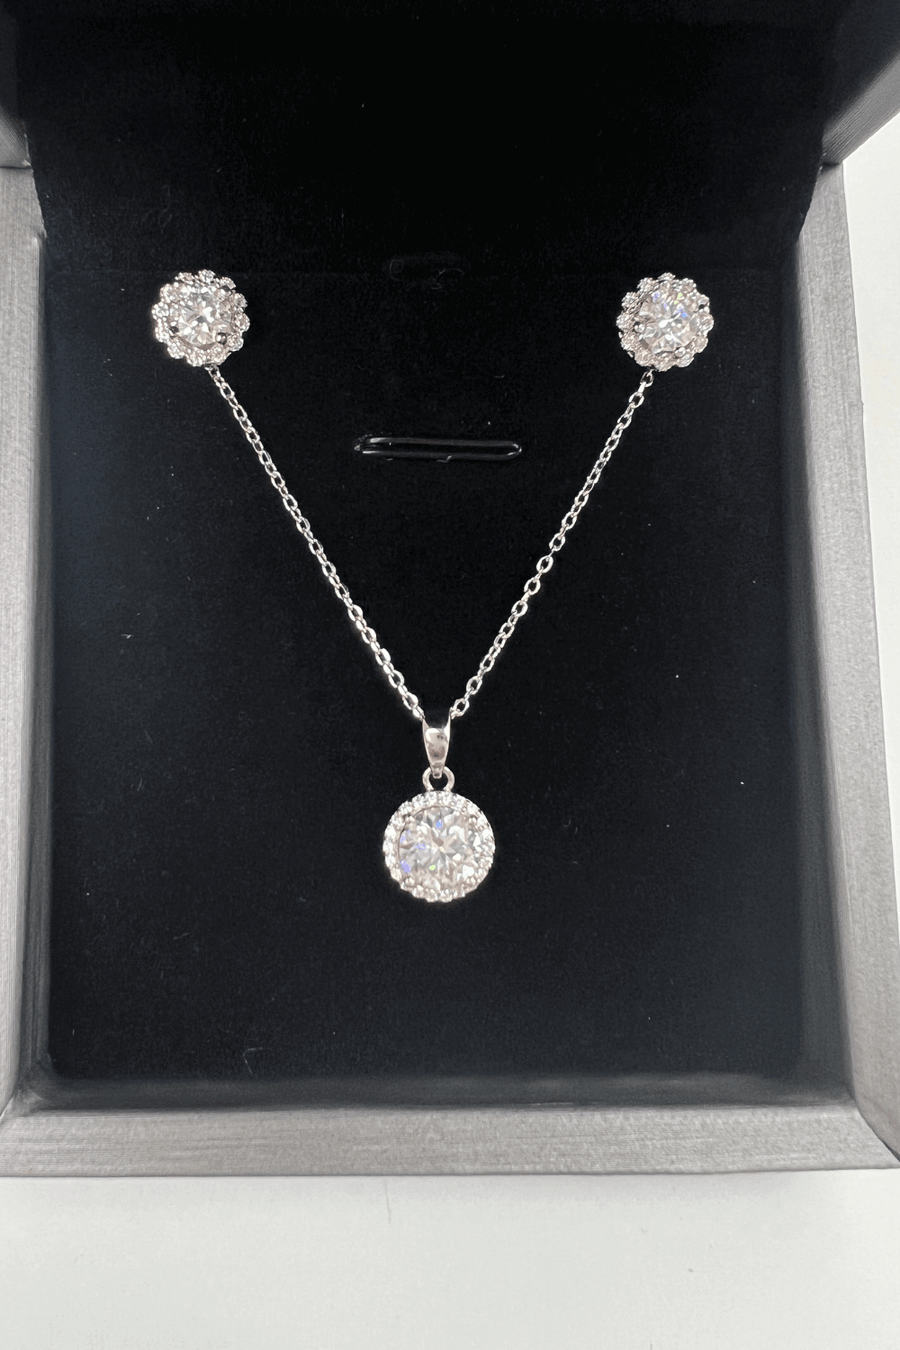 Best Diamond Jewelry Bundle Set Gift | Best Floral Diamond Necklace, Earrings Jewelry Gift for Women, Mother, Wife, Daughter | MASON New York